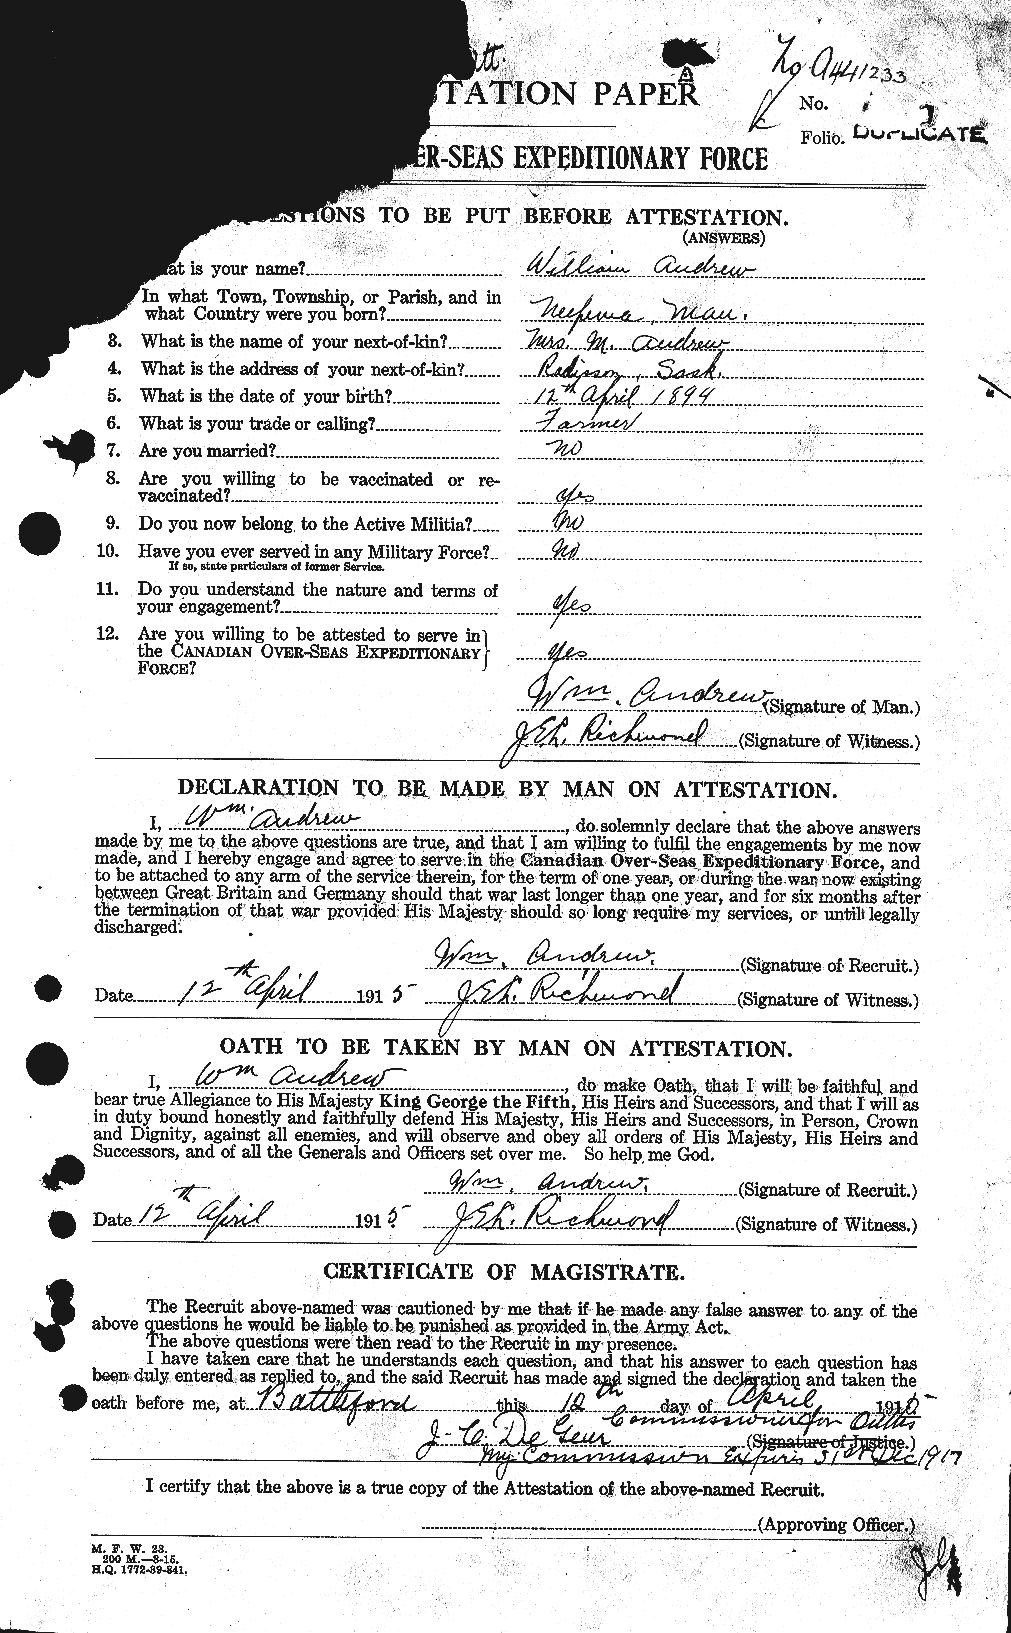 Personnel Records of the First World War - CEF 210475a